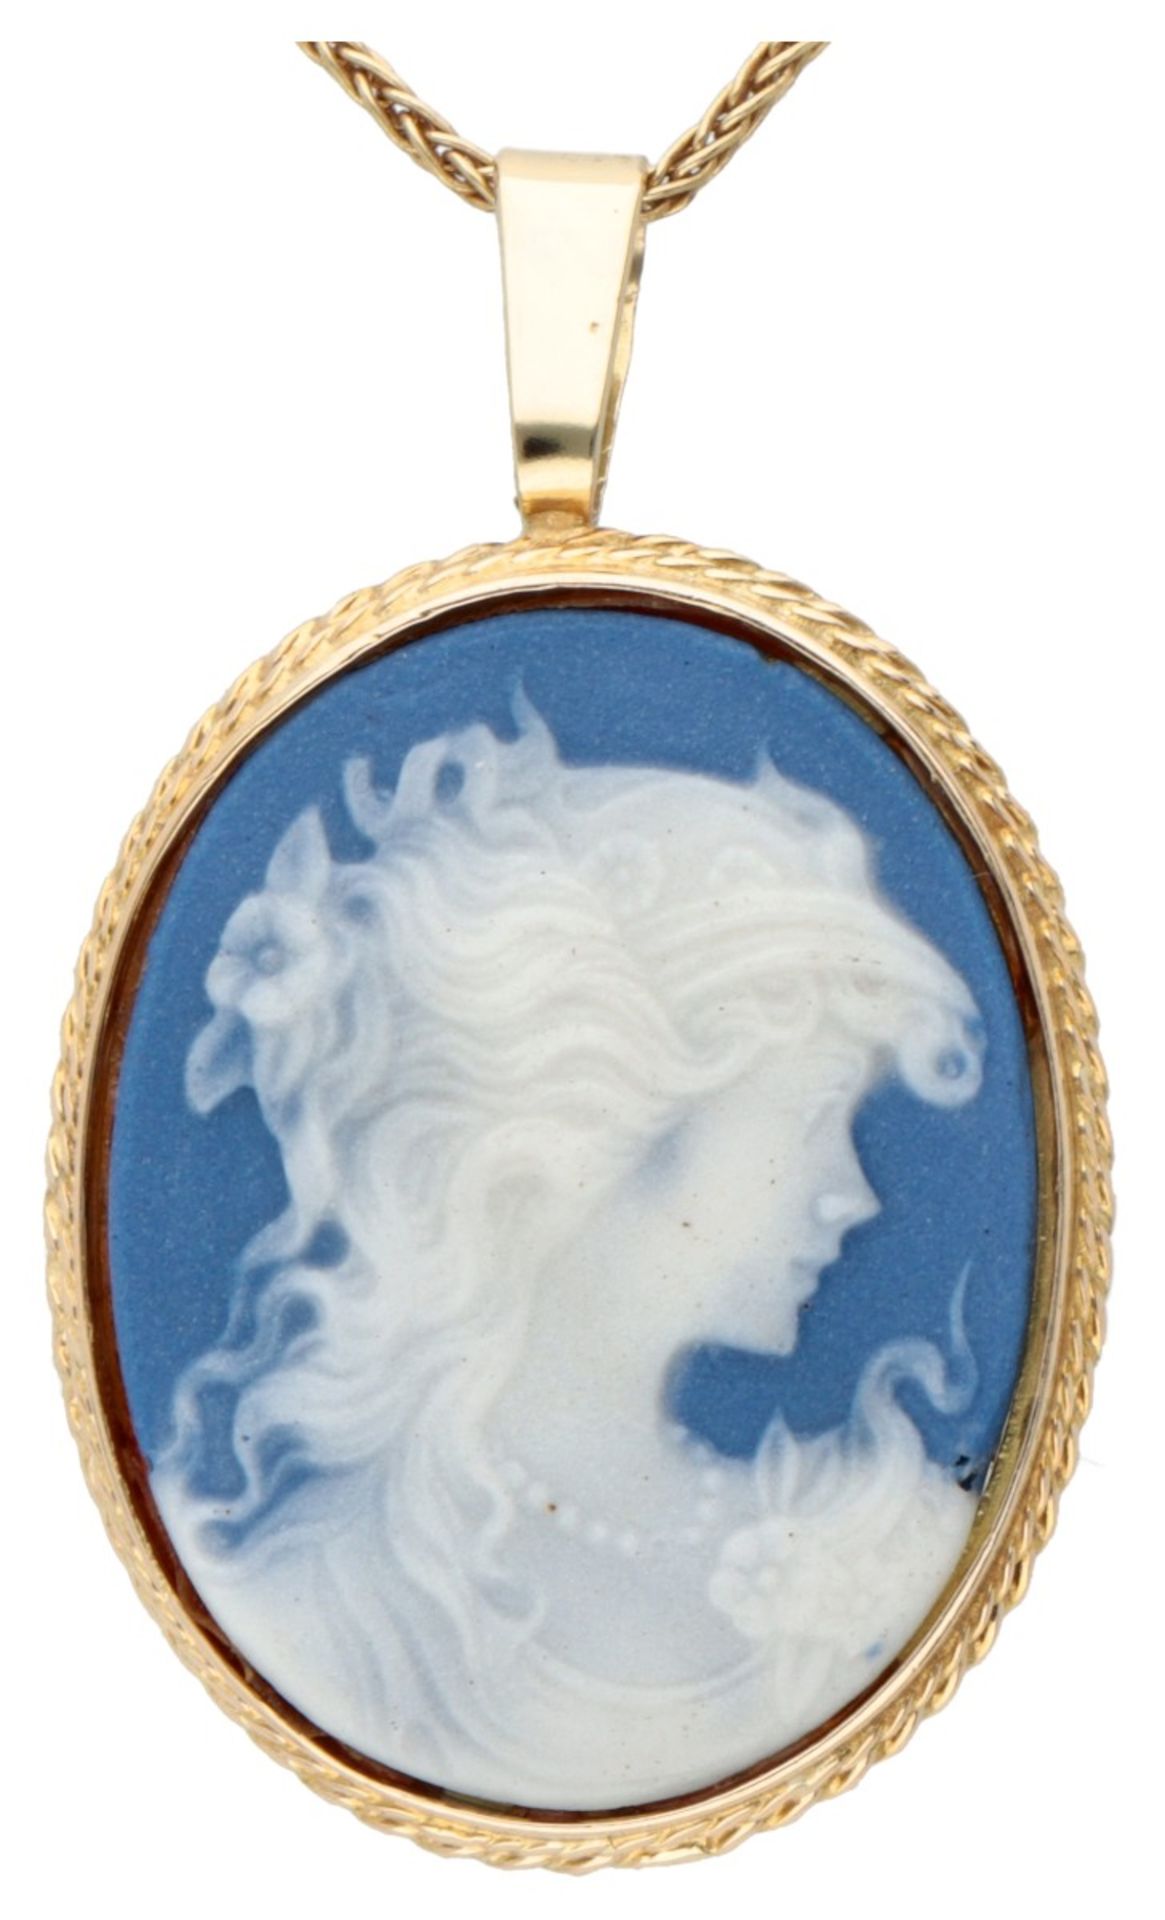 Vintage 18K. yellow gold necklace with pendant set with a blue cameo with a profile portrait of a la - Image 2 of 3